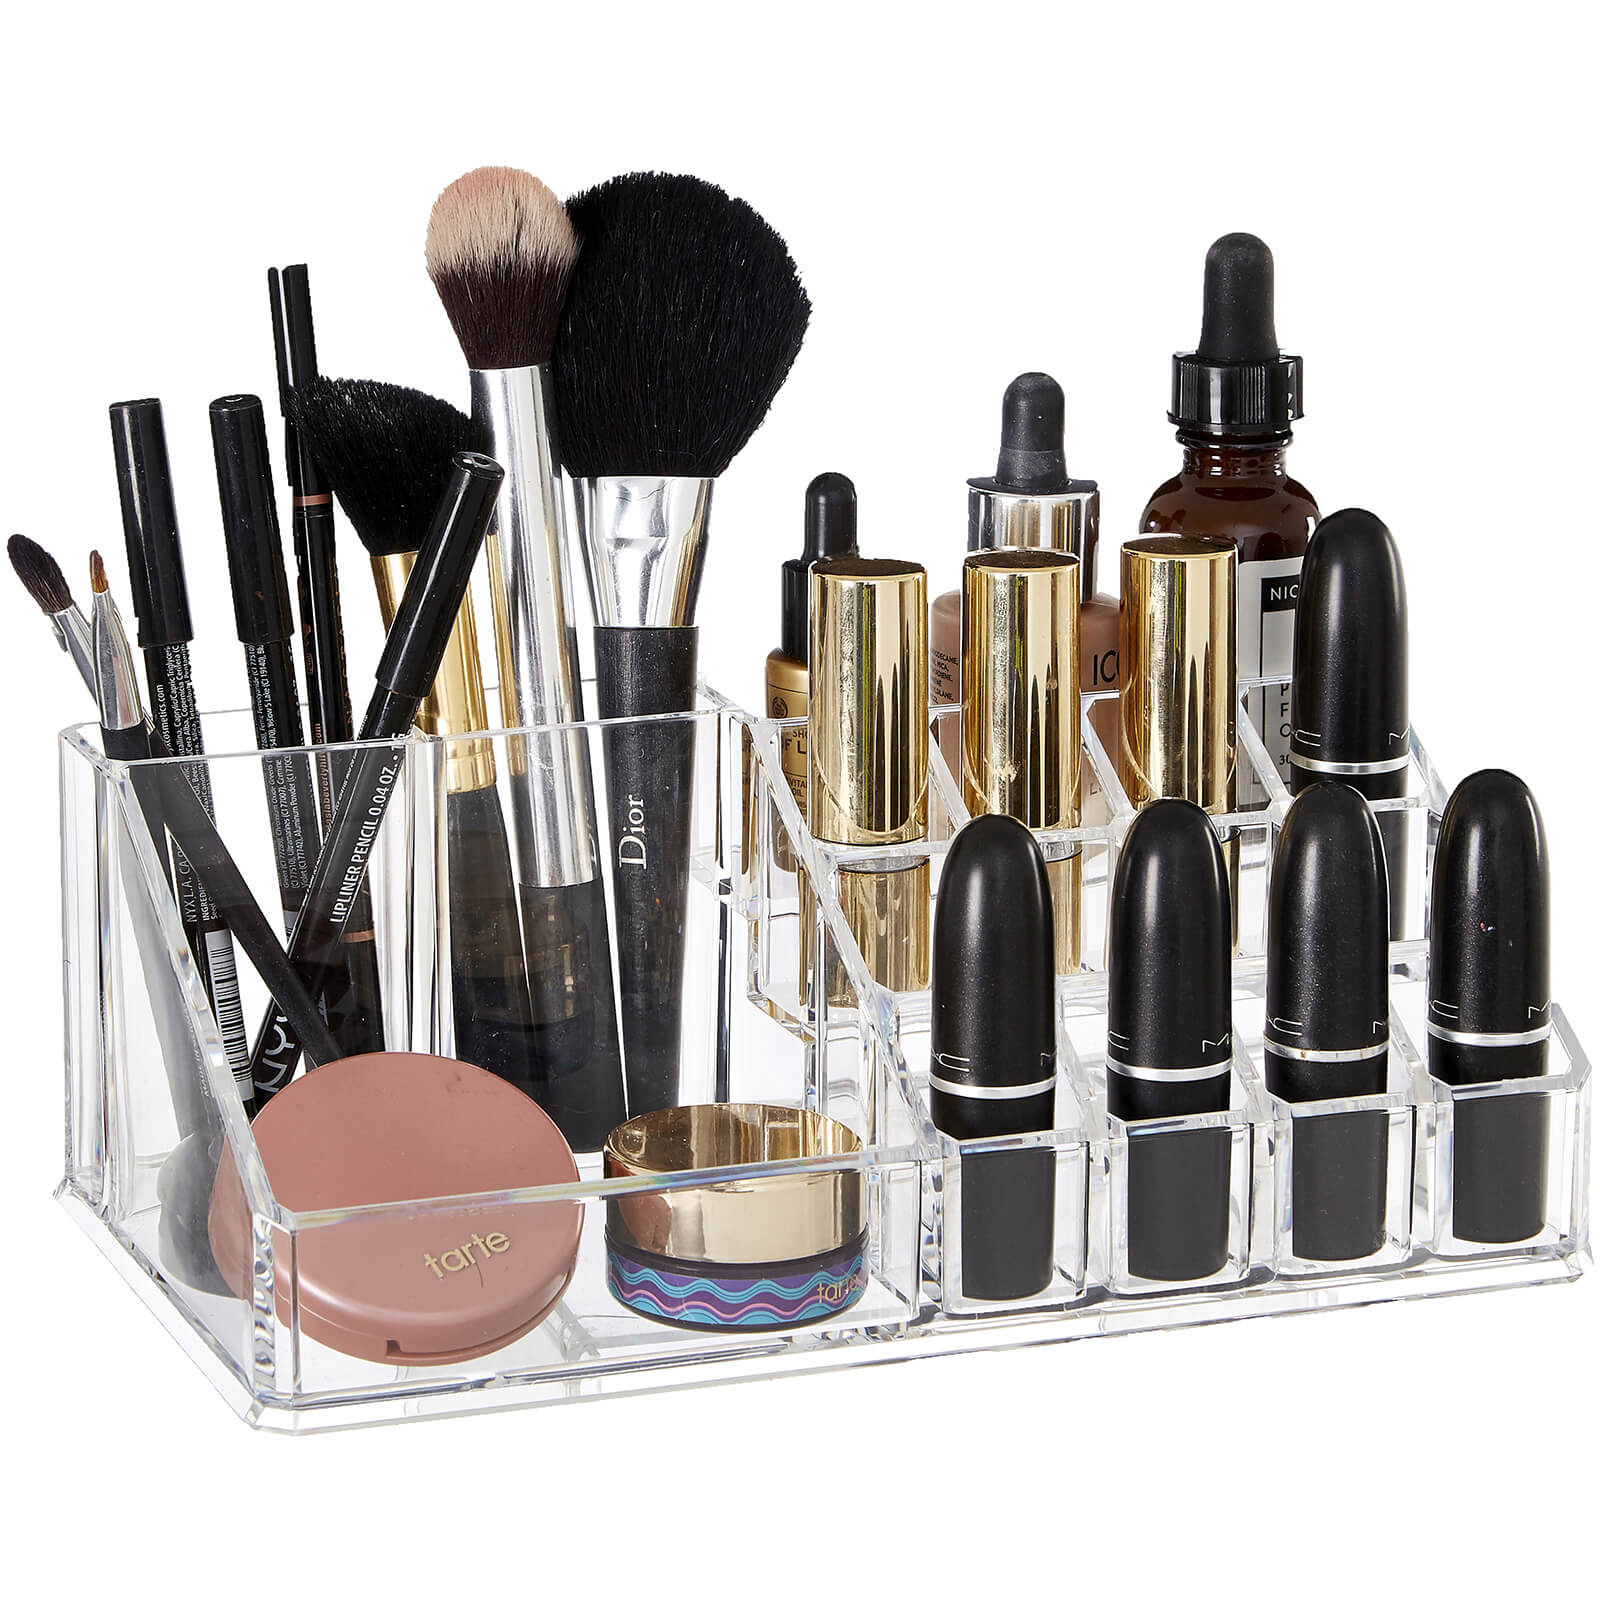 Image of Clear Cosmetics Organiser - 16 Compartment